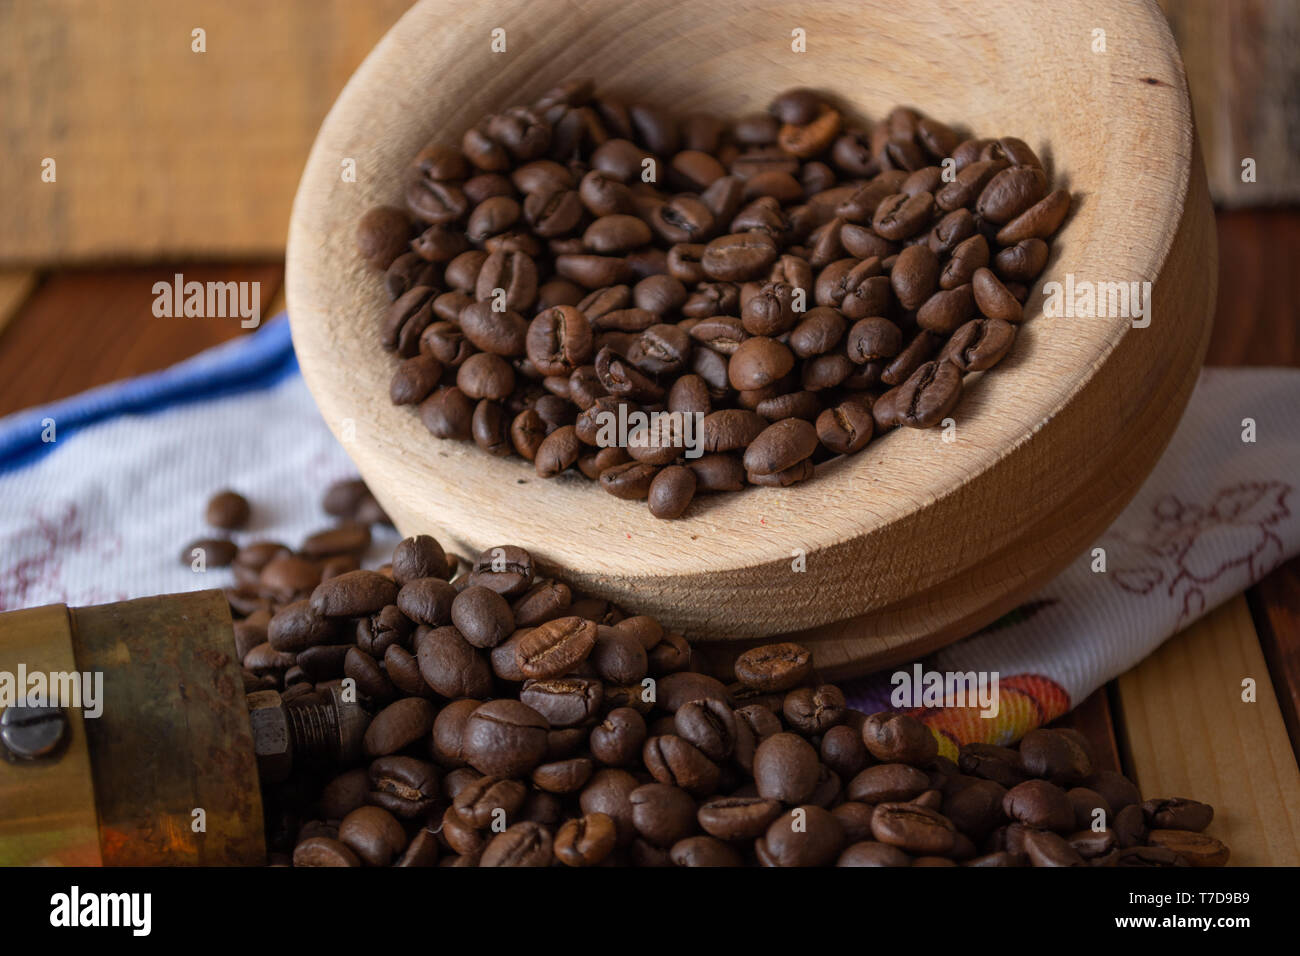 Coffee ready to be milled with old grinder. Coffee is in the table Stock Photo